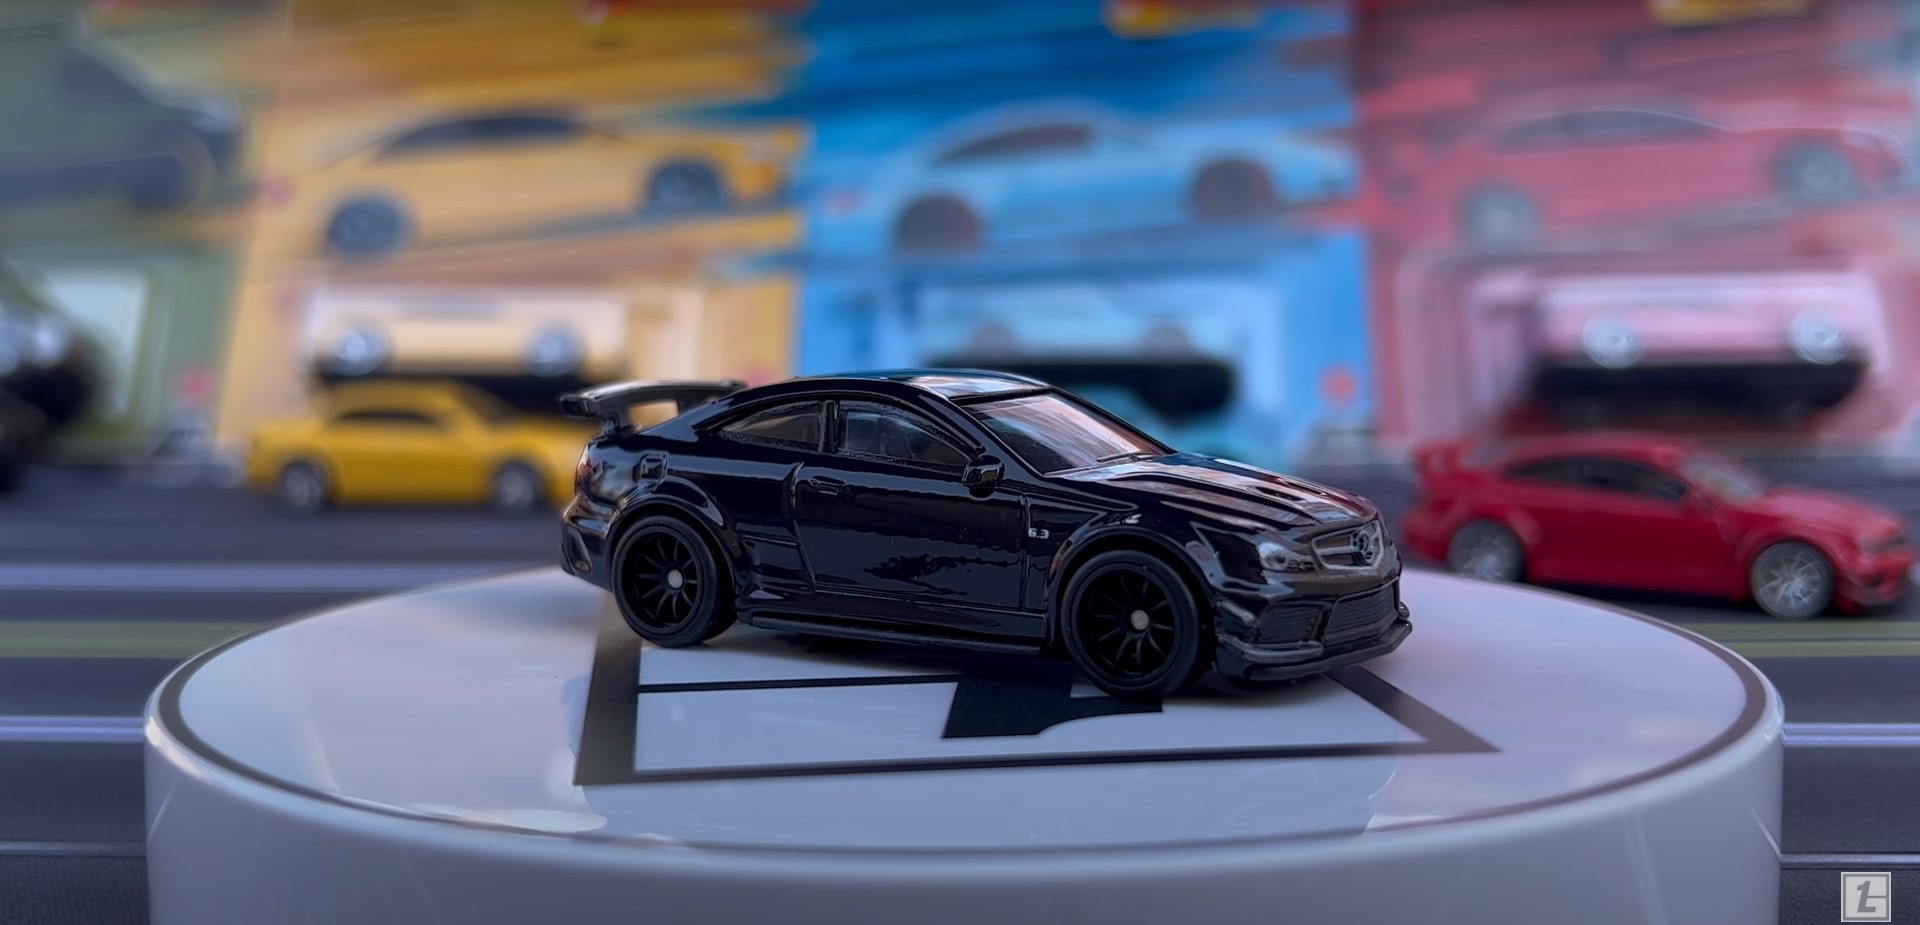 5 Best Hot Wheels Chase Cars From 2022 - autoevolution